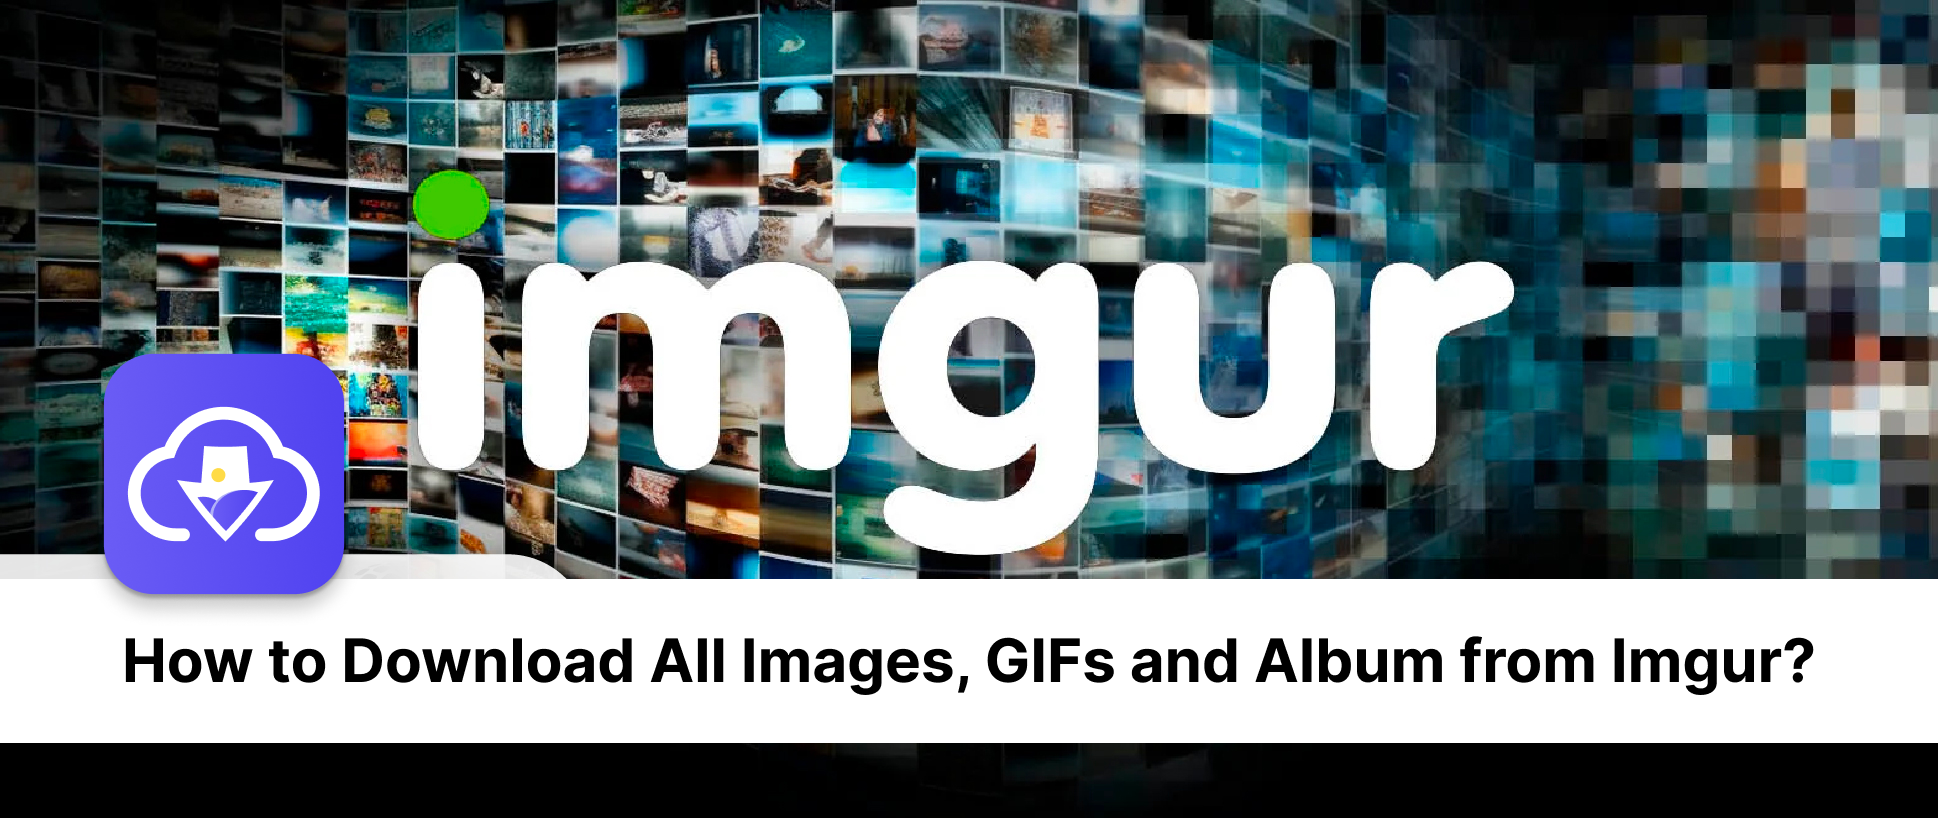 How to Download All Images GIFs and Album from Imgur